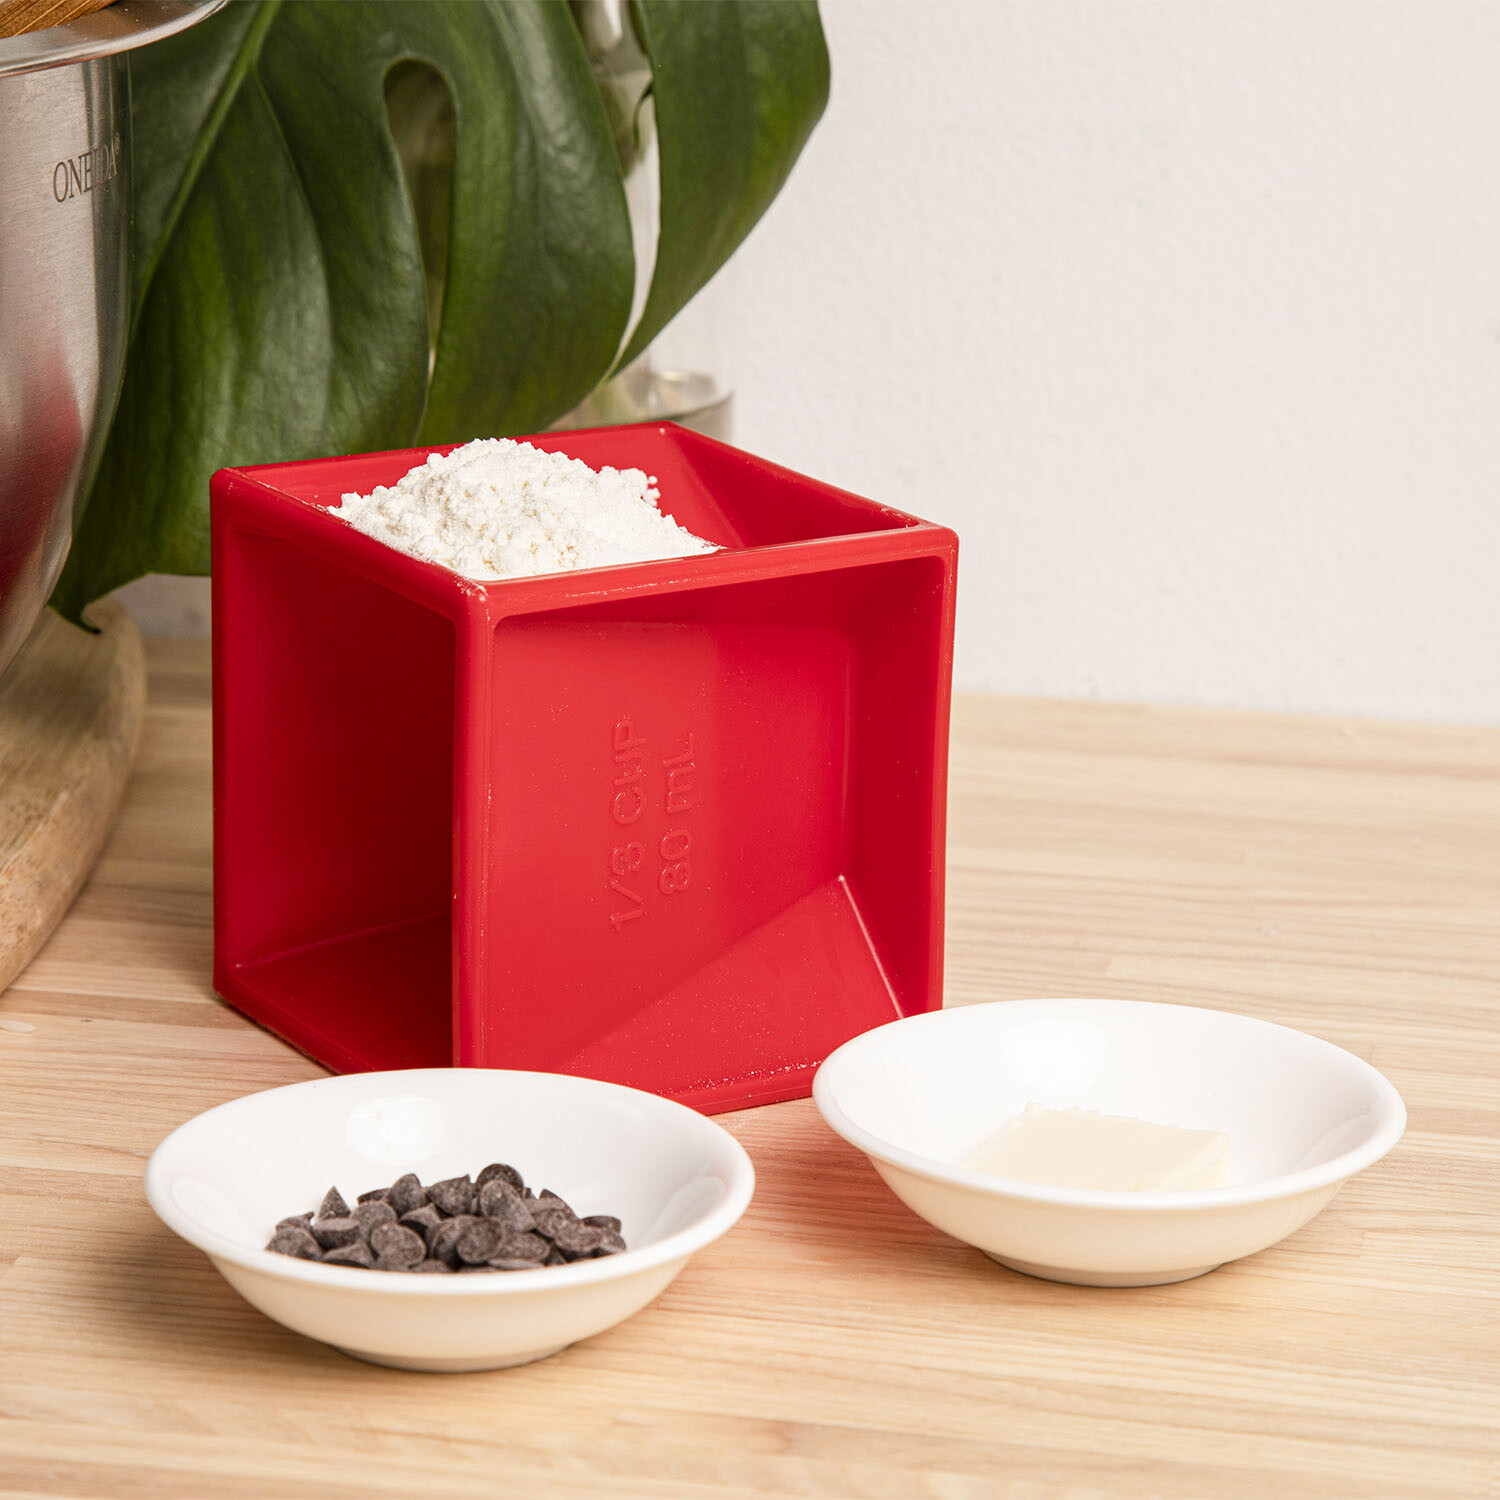 The Kitchen Cube: All-in-1 Measuring Device